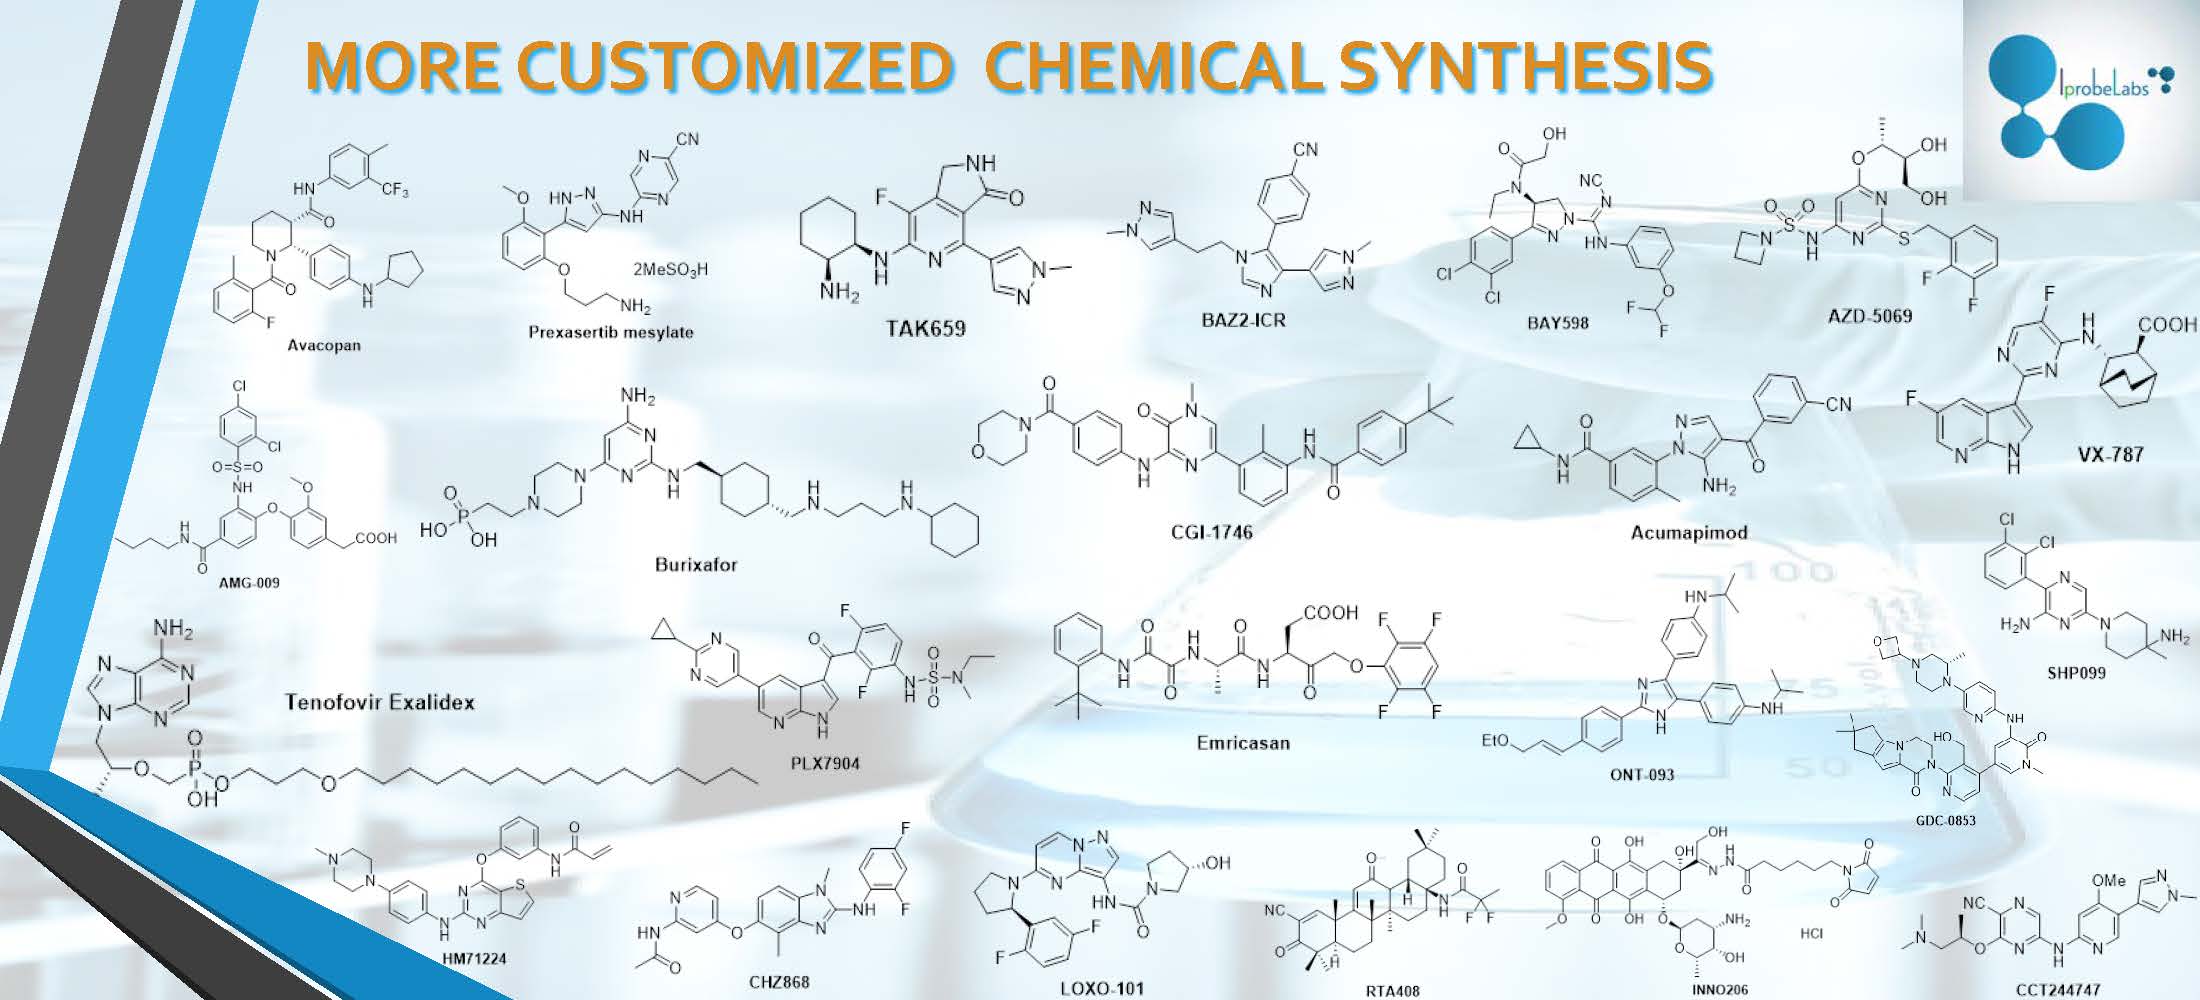 Customized Chemical Synthesis